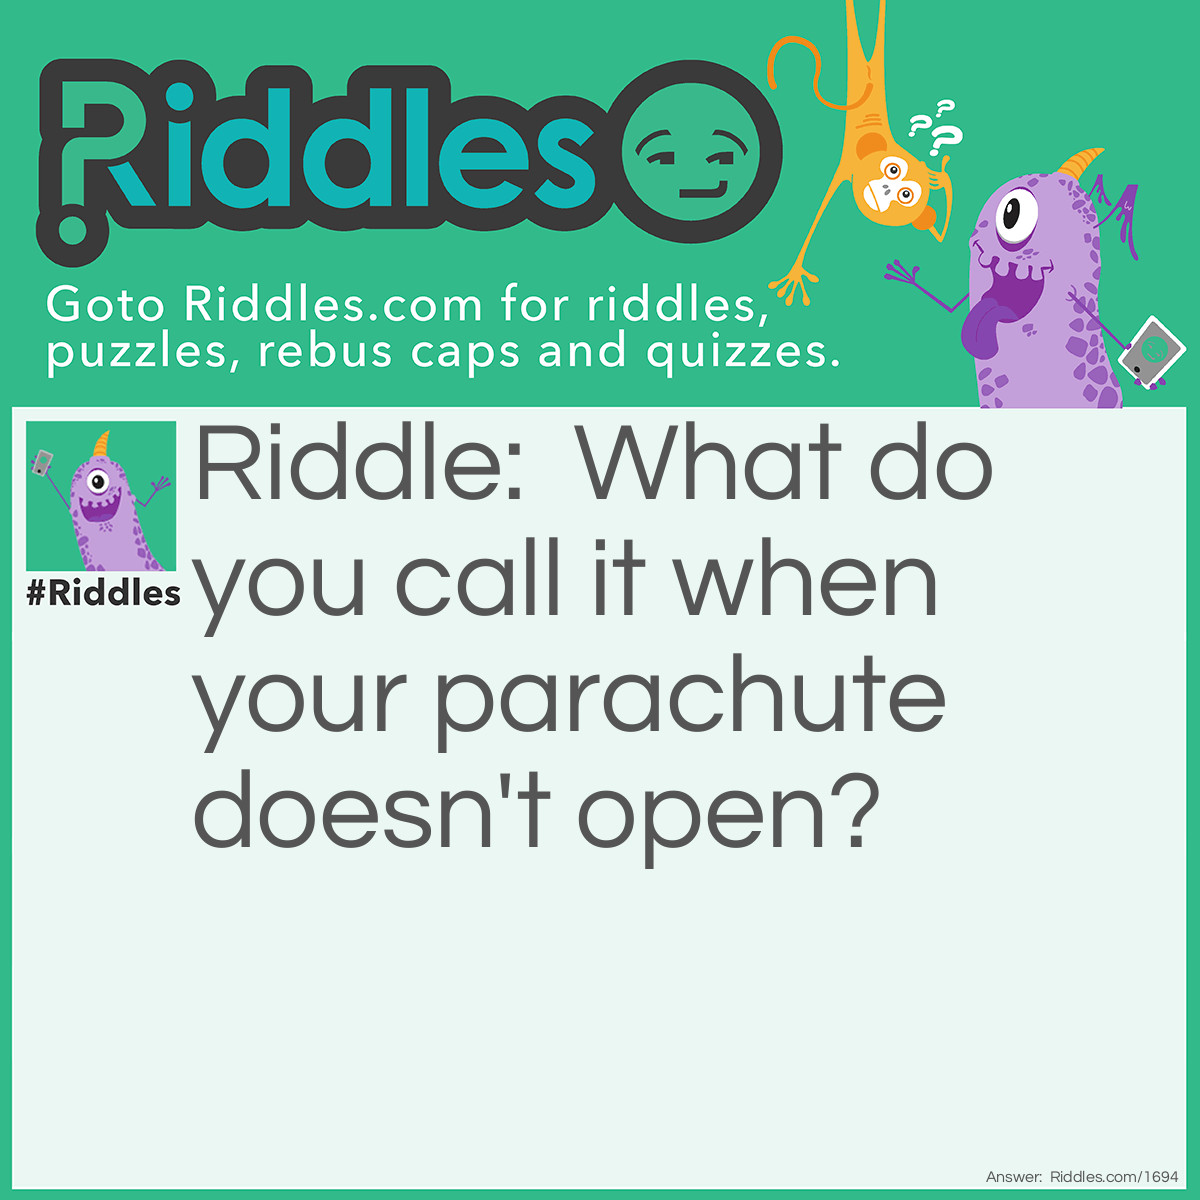 Riddle: What do you call it when your parachute doesn't open? Answer: Jumping to a conclusion.